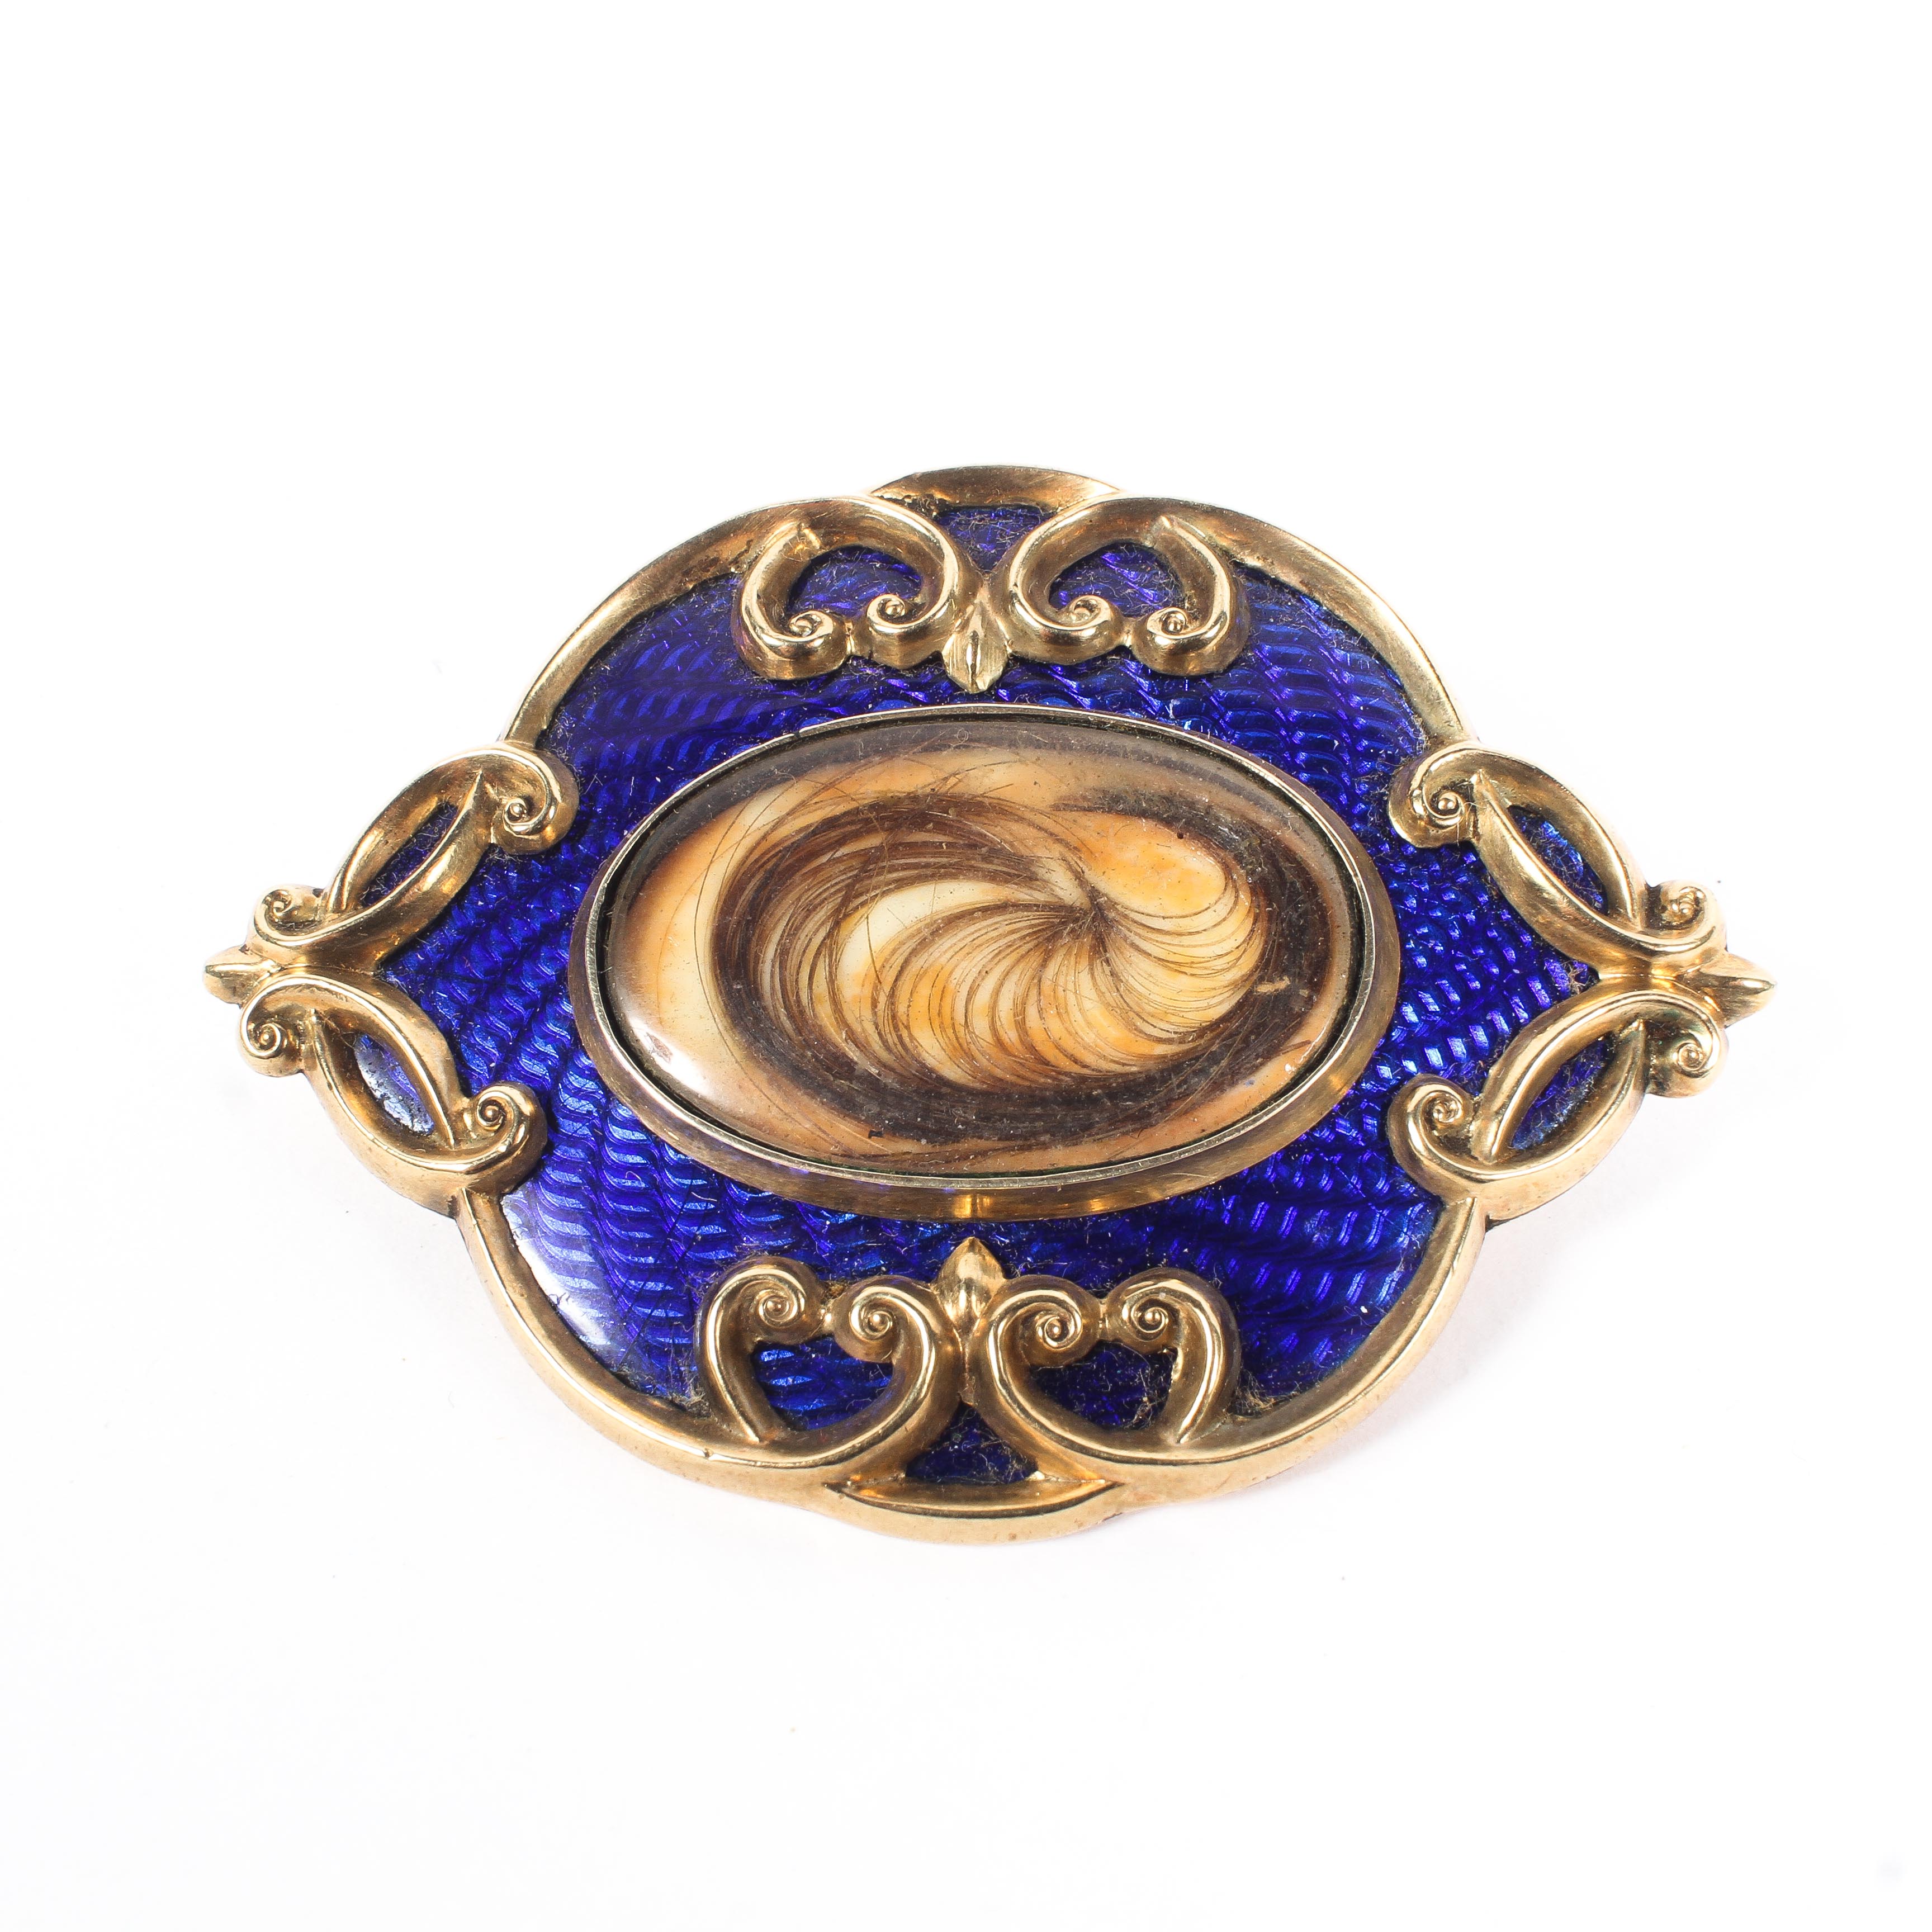 An enamel and yellow metal mourning brooch.